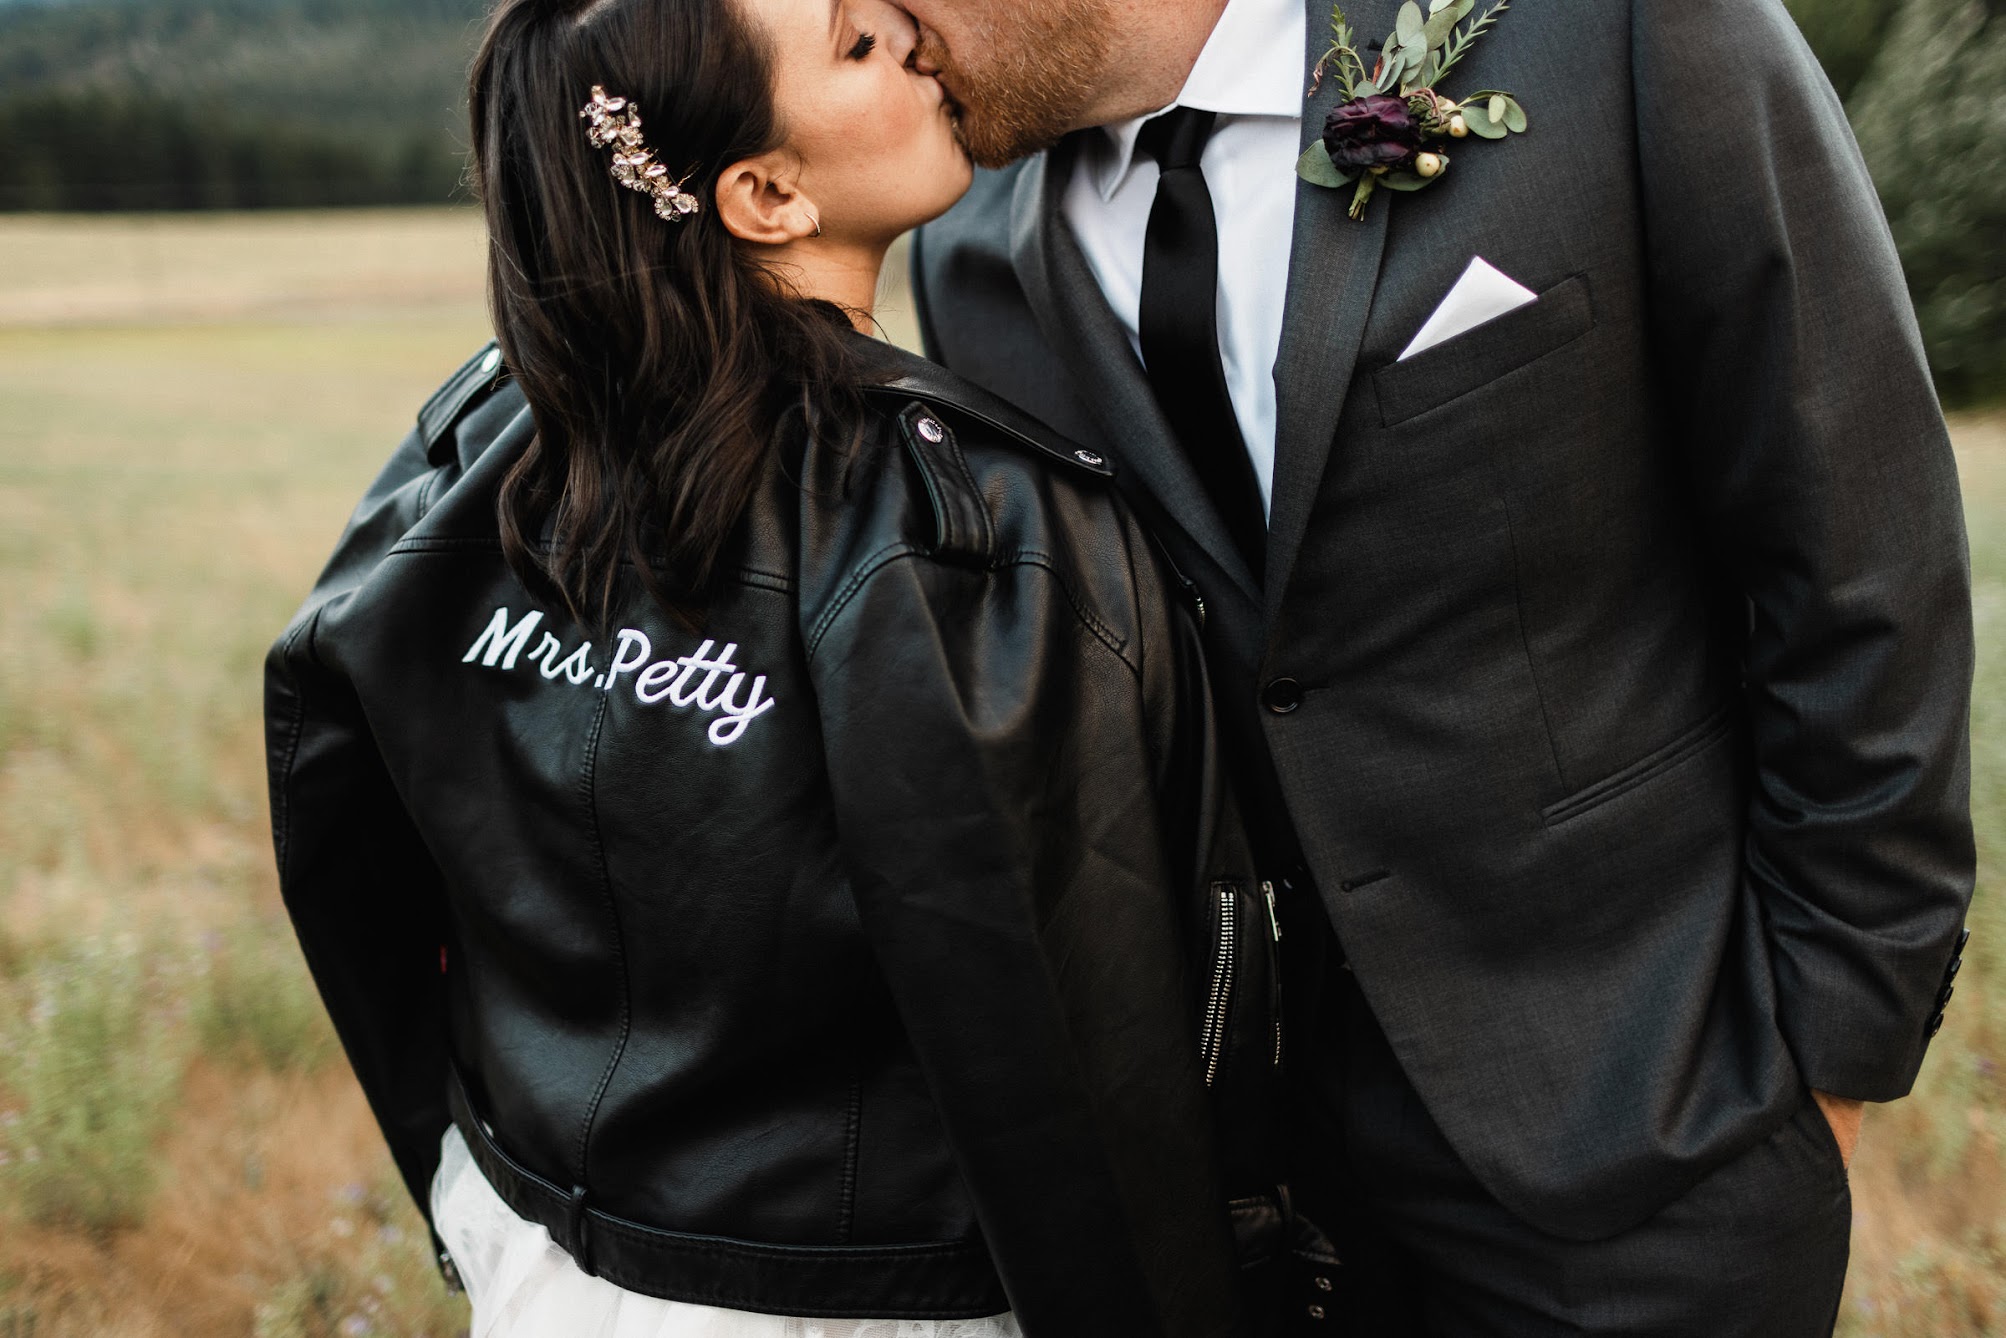 Black leather jacket with Mrs. Petty written on the back 